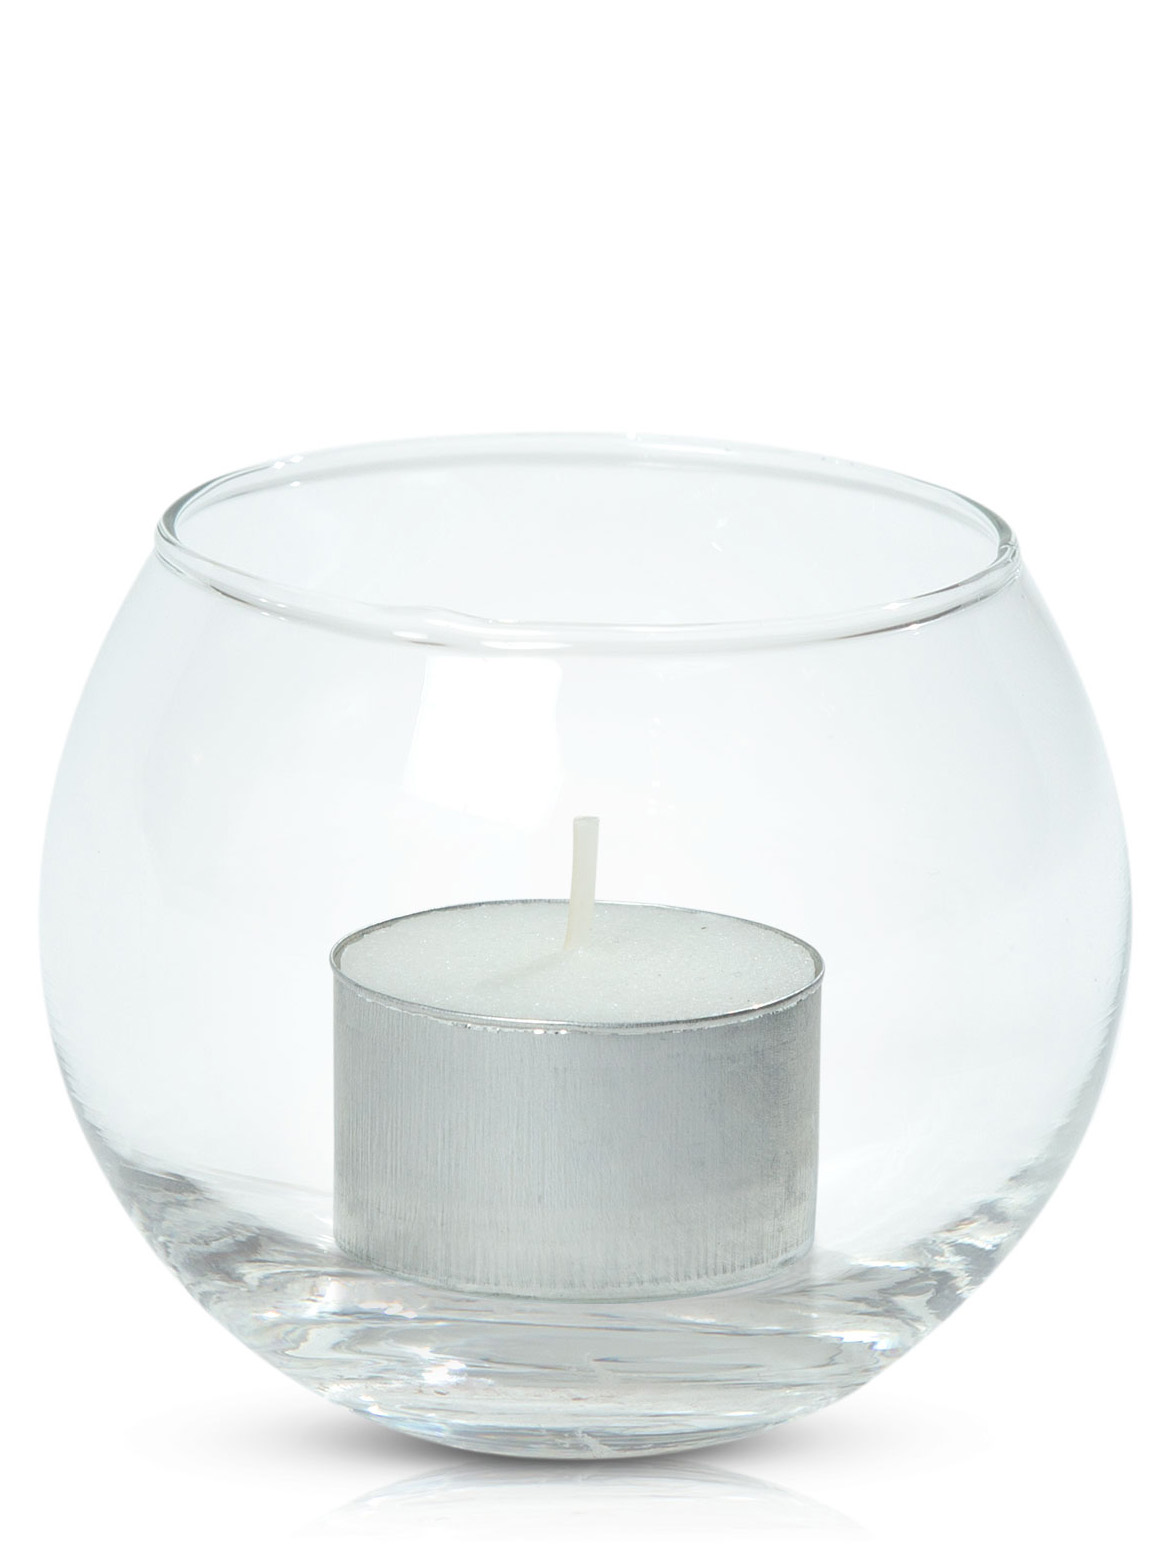 Event Tealight in Fishbowl Pack